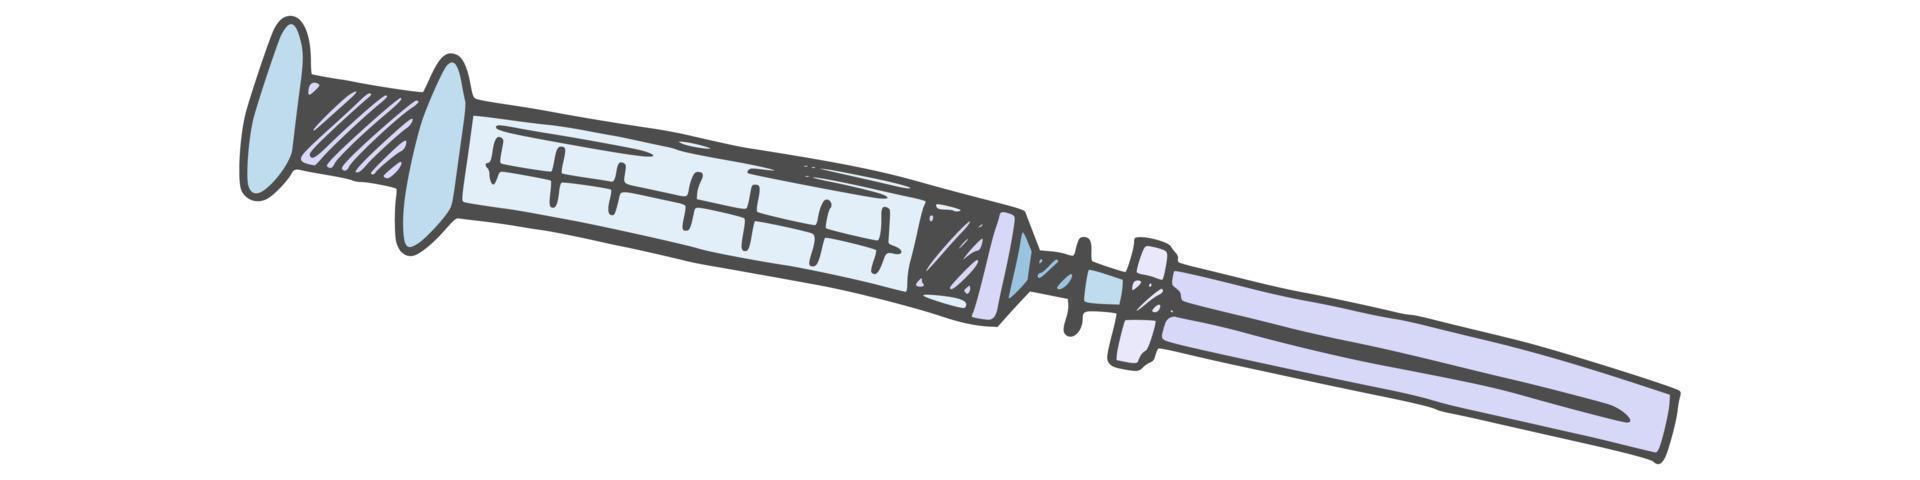 medical syringe for injections. doodle image new vector